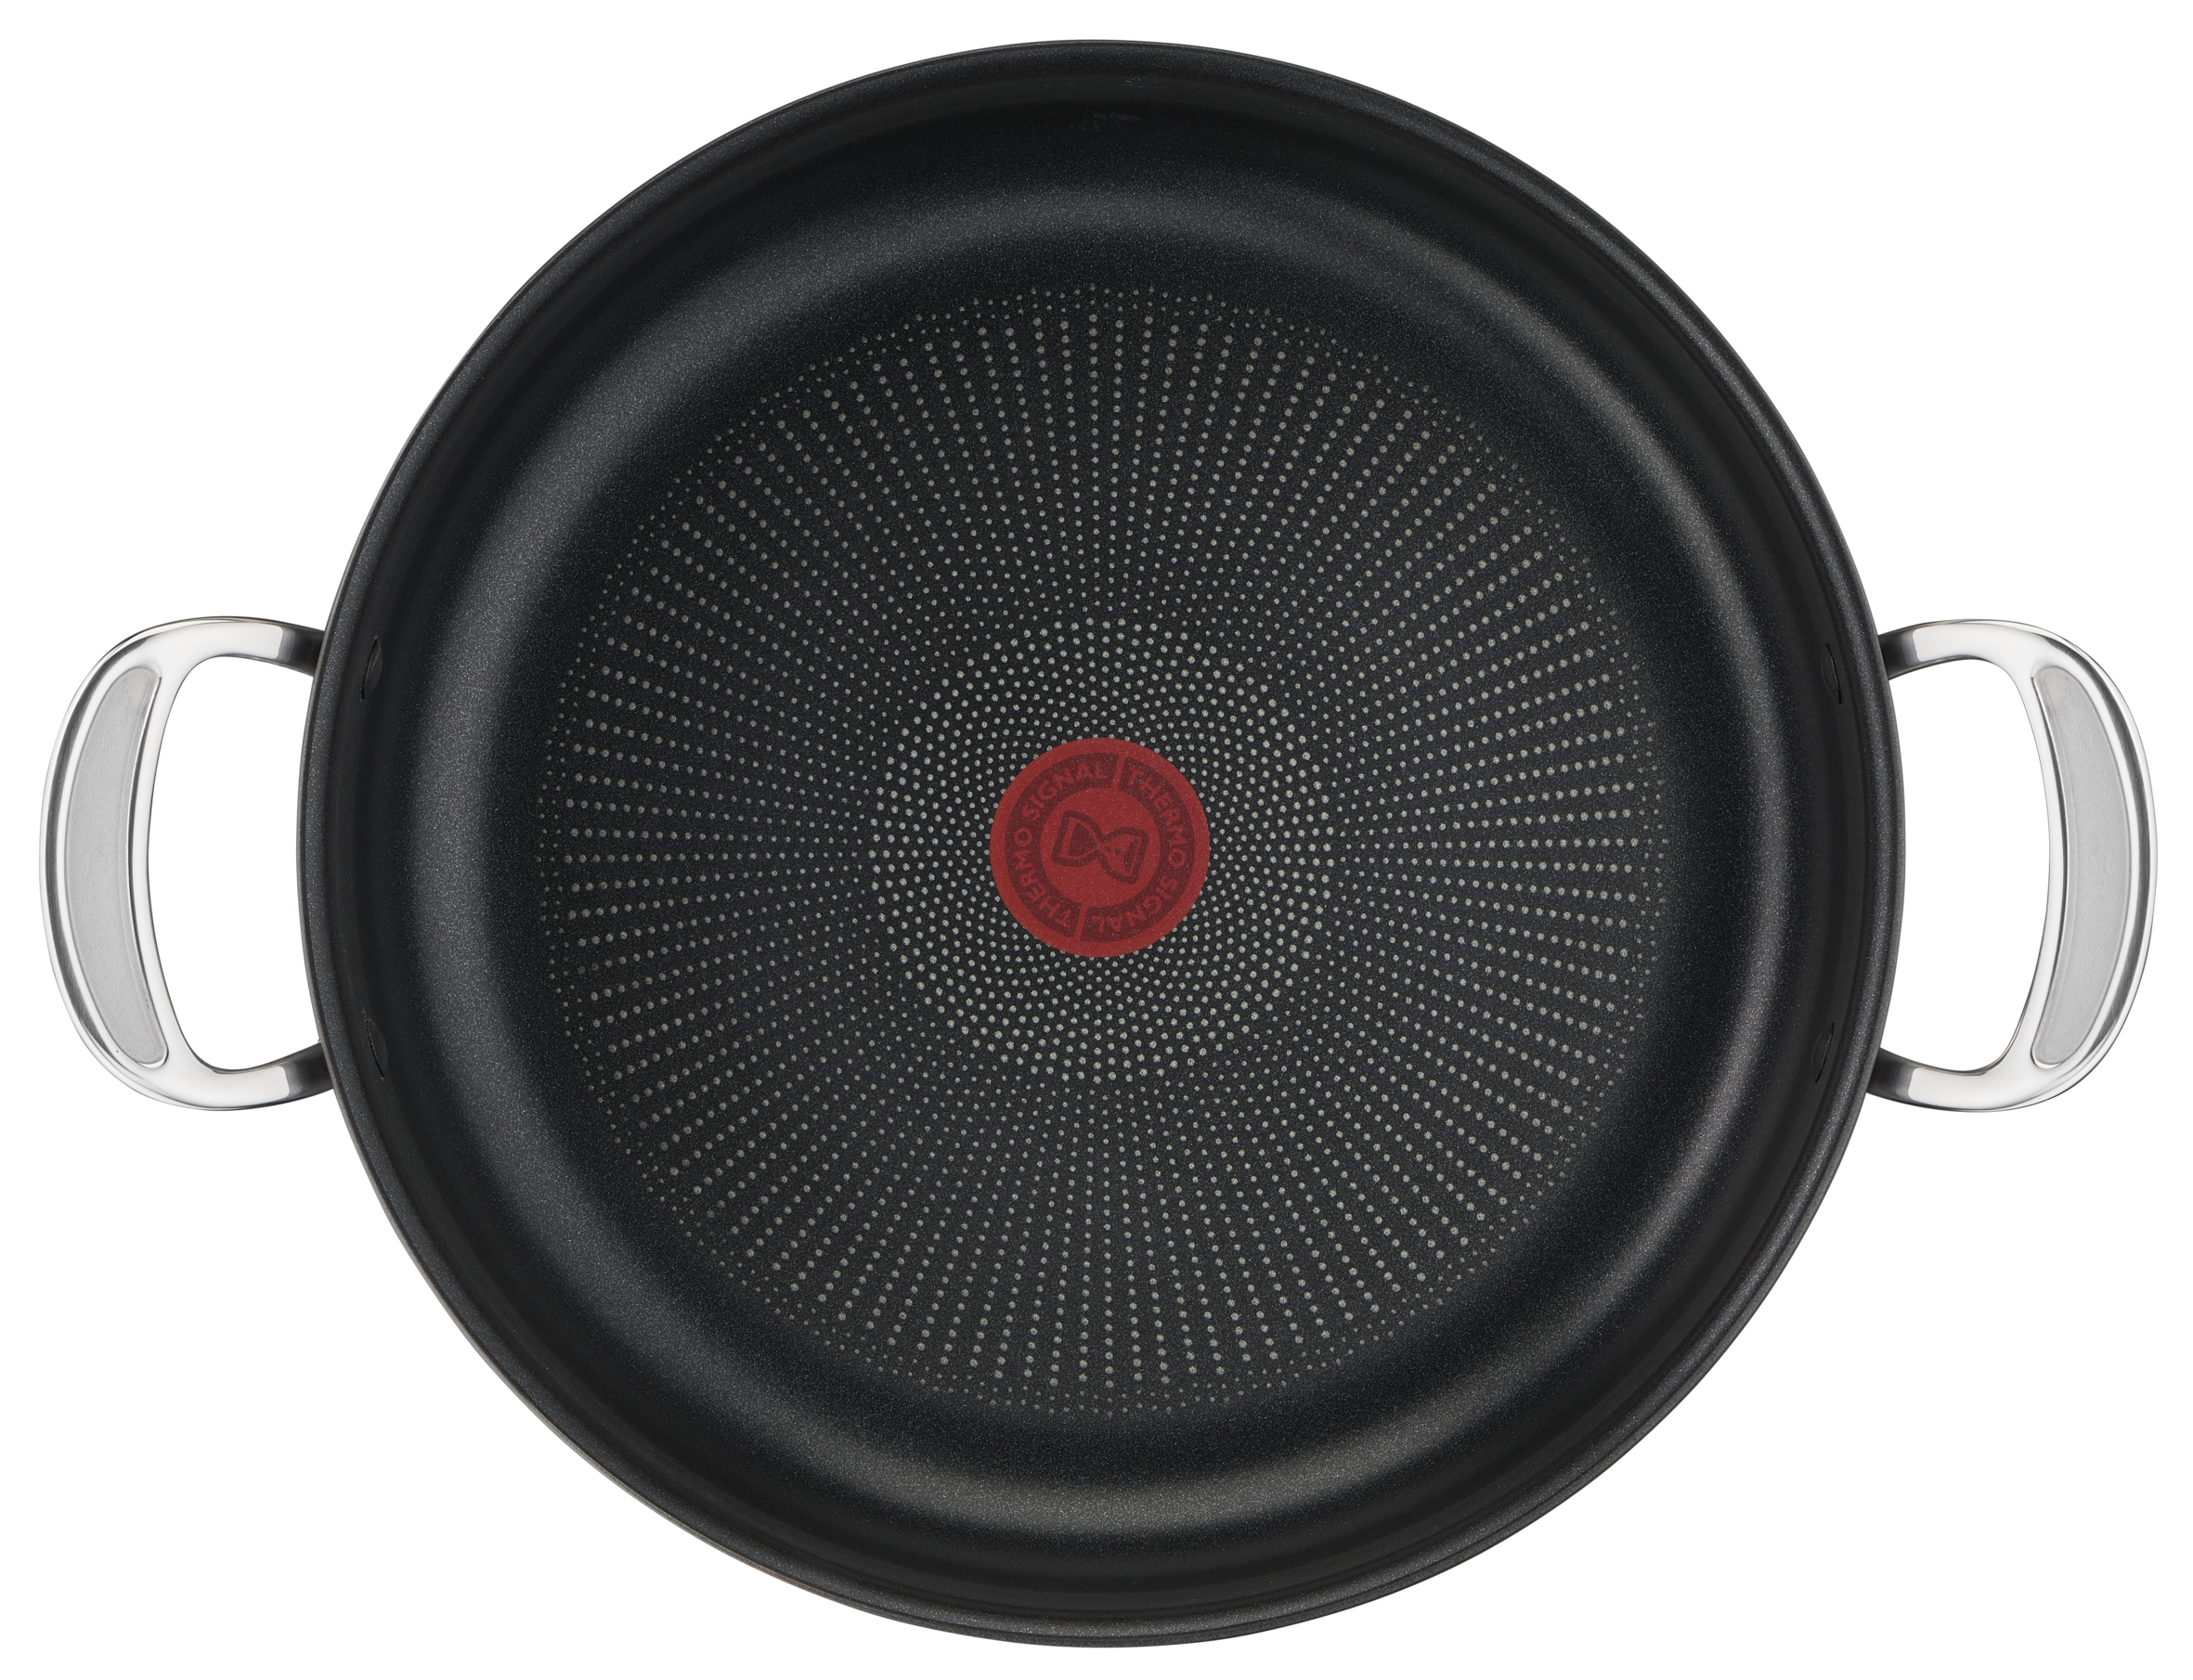 Jamie Oliver by Tefal Cooks Classic Induction Non-Stick Hard Anodised All-In-One Pan 30cm + Lid